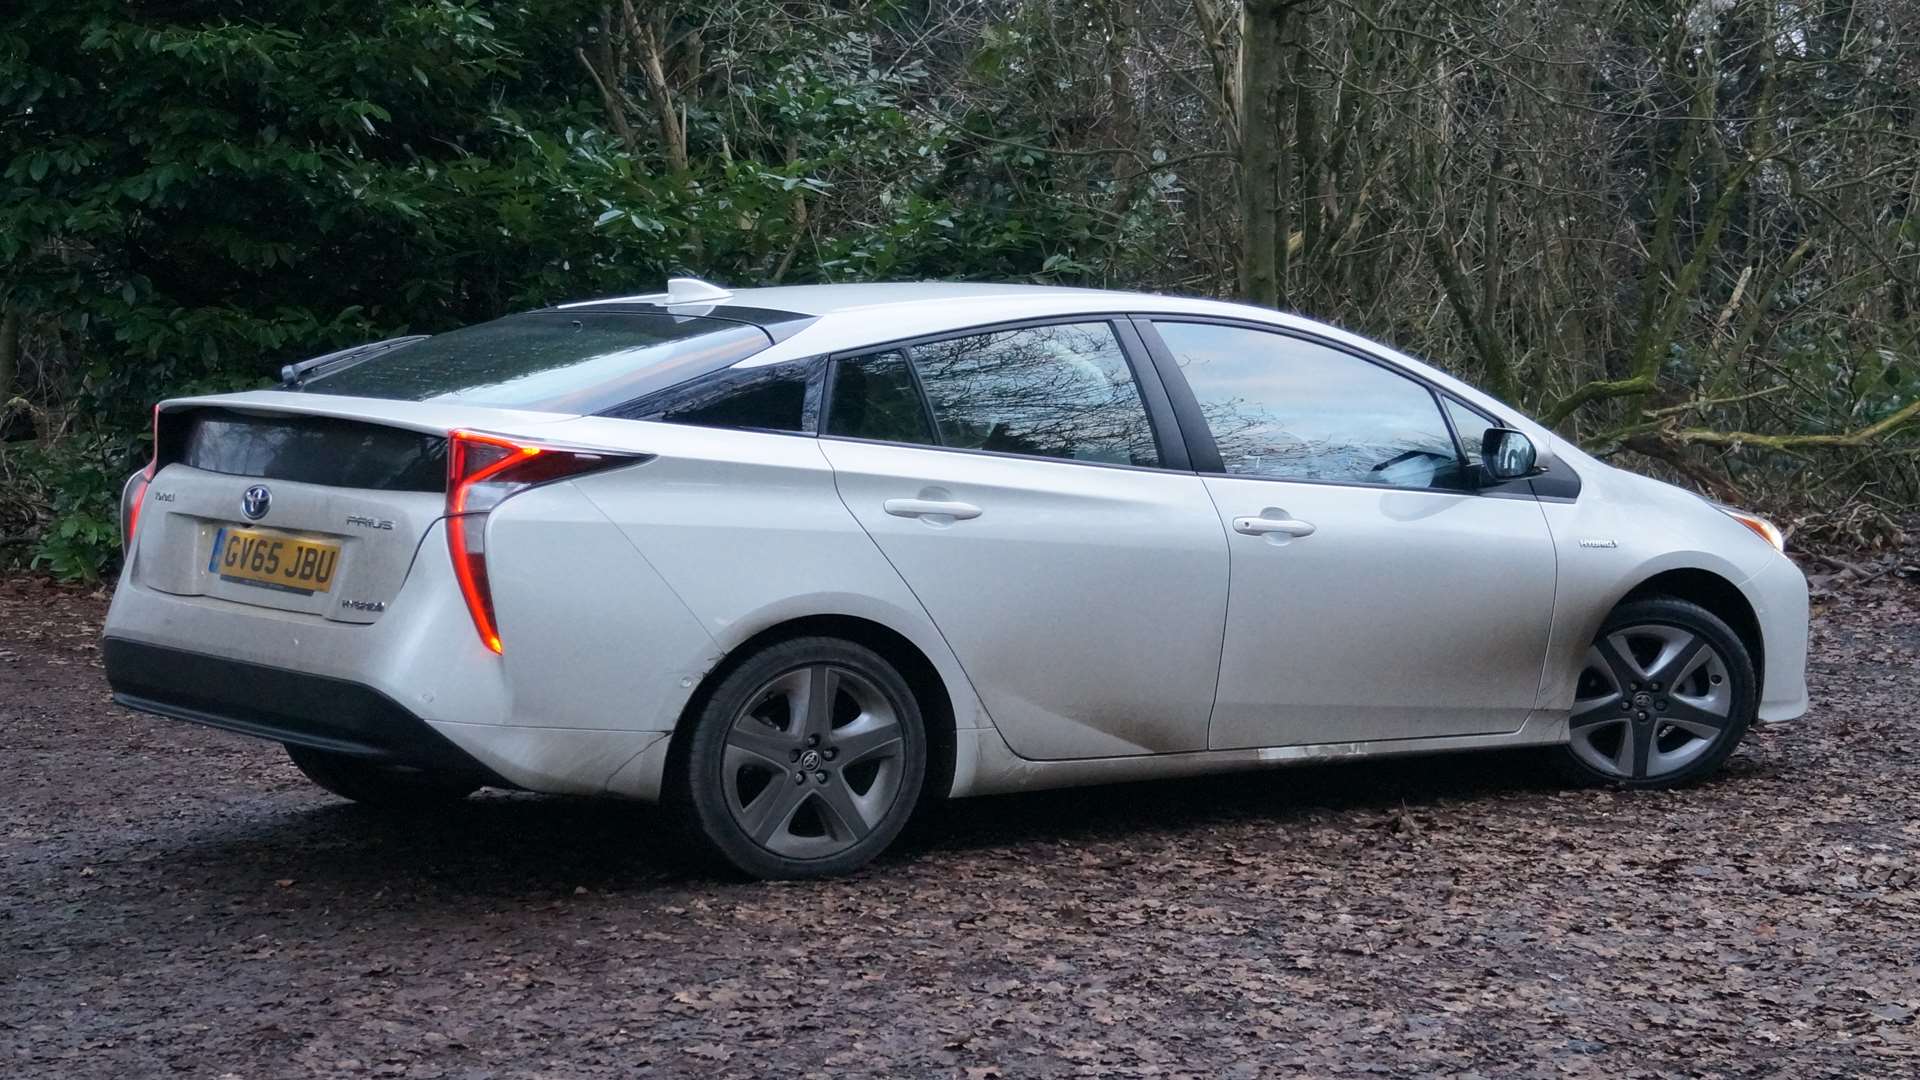 The design is intended to give the Prius greater dynamism